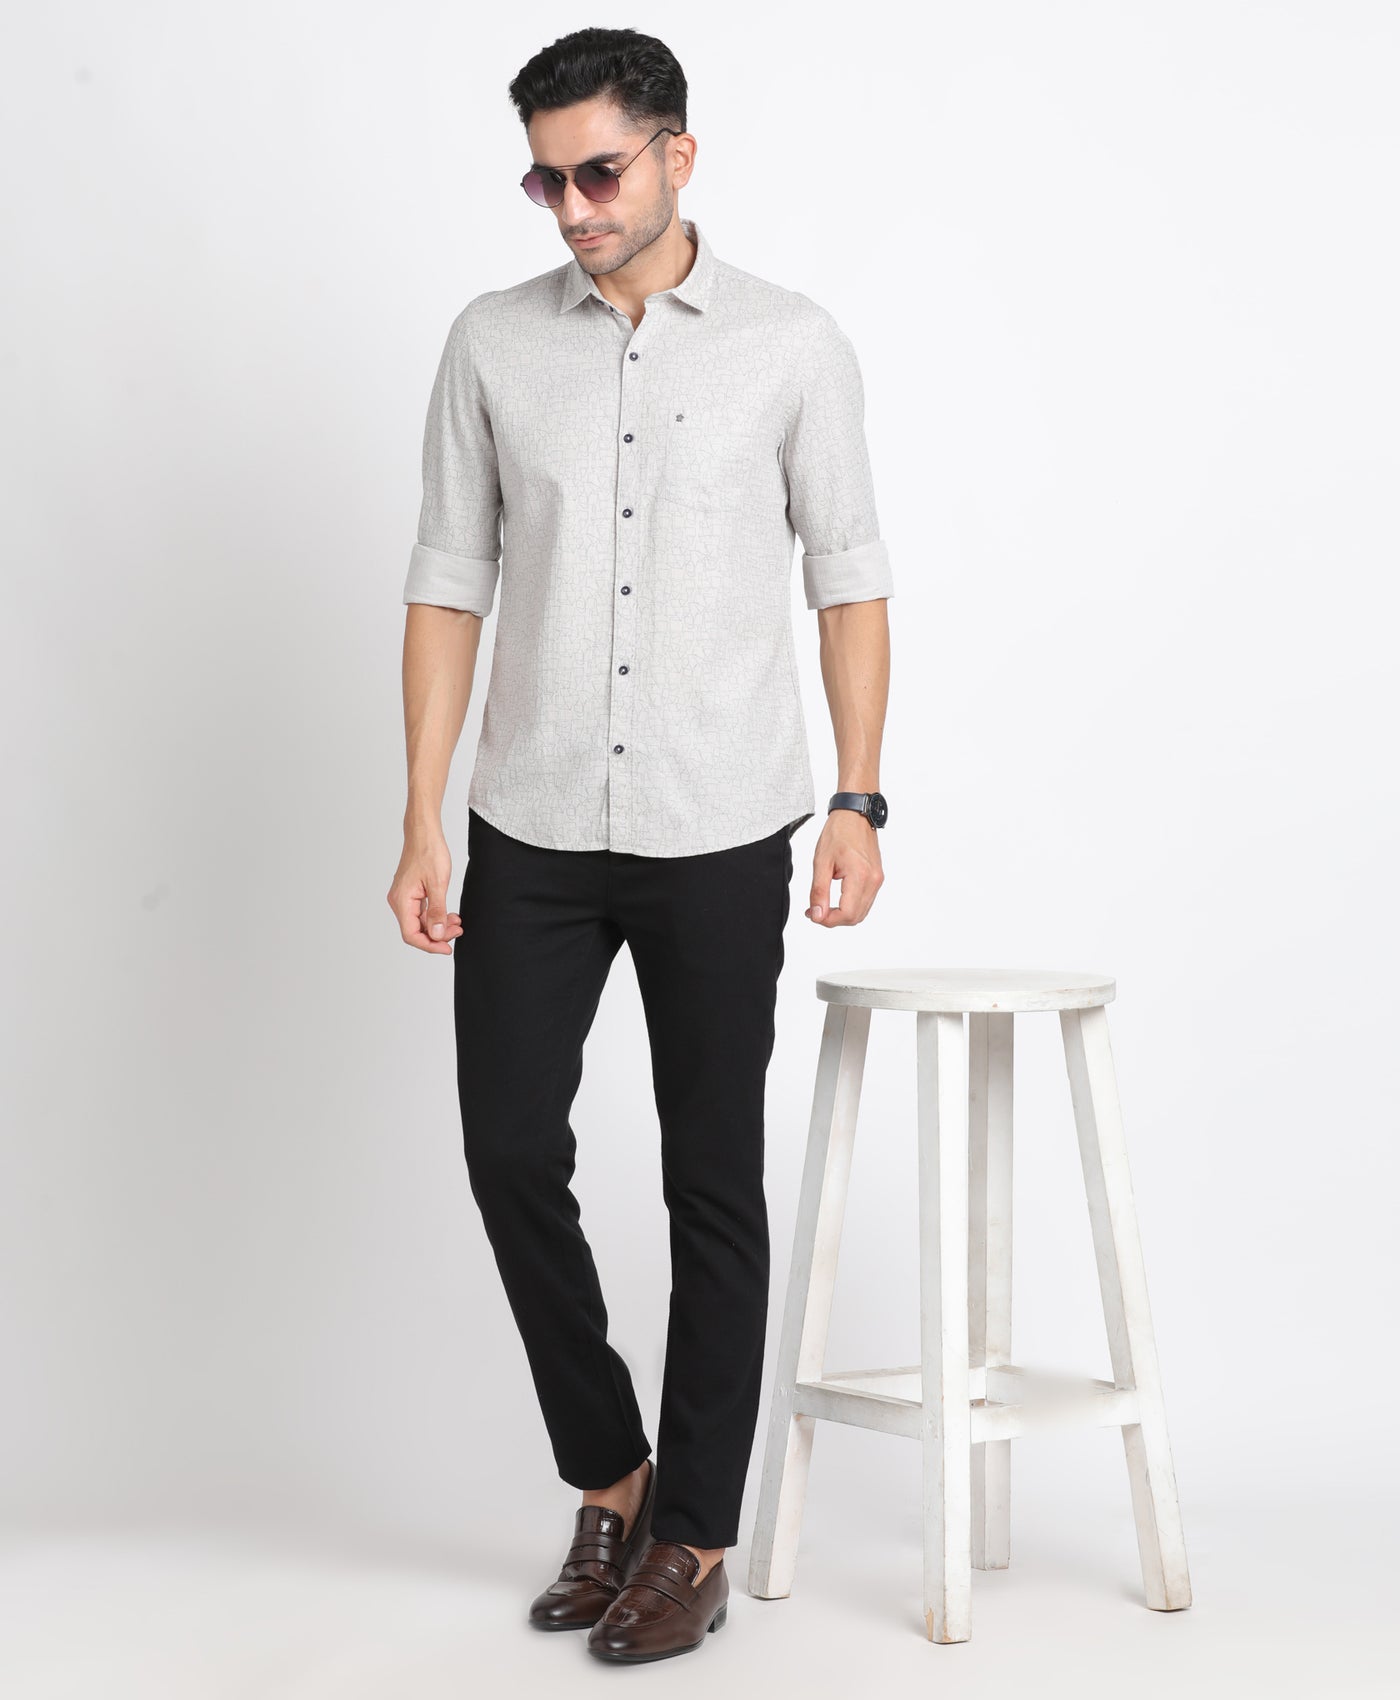 100% Cotton Grey Printed Slim Fit Full Sleeve Casual Shirt